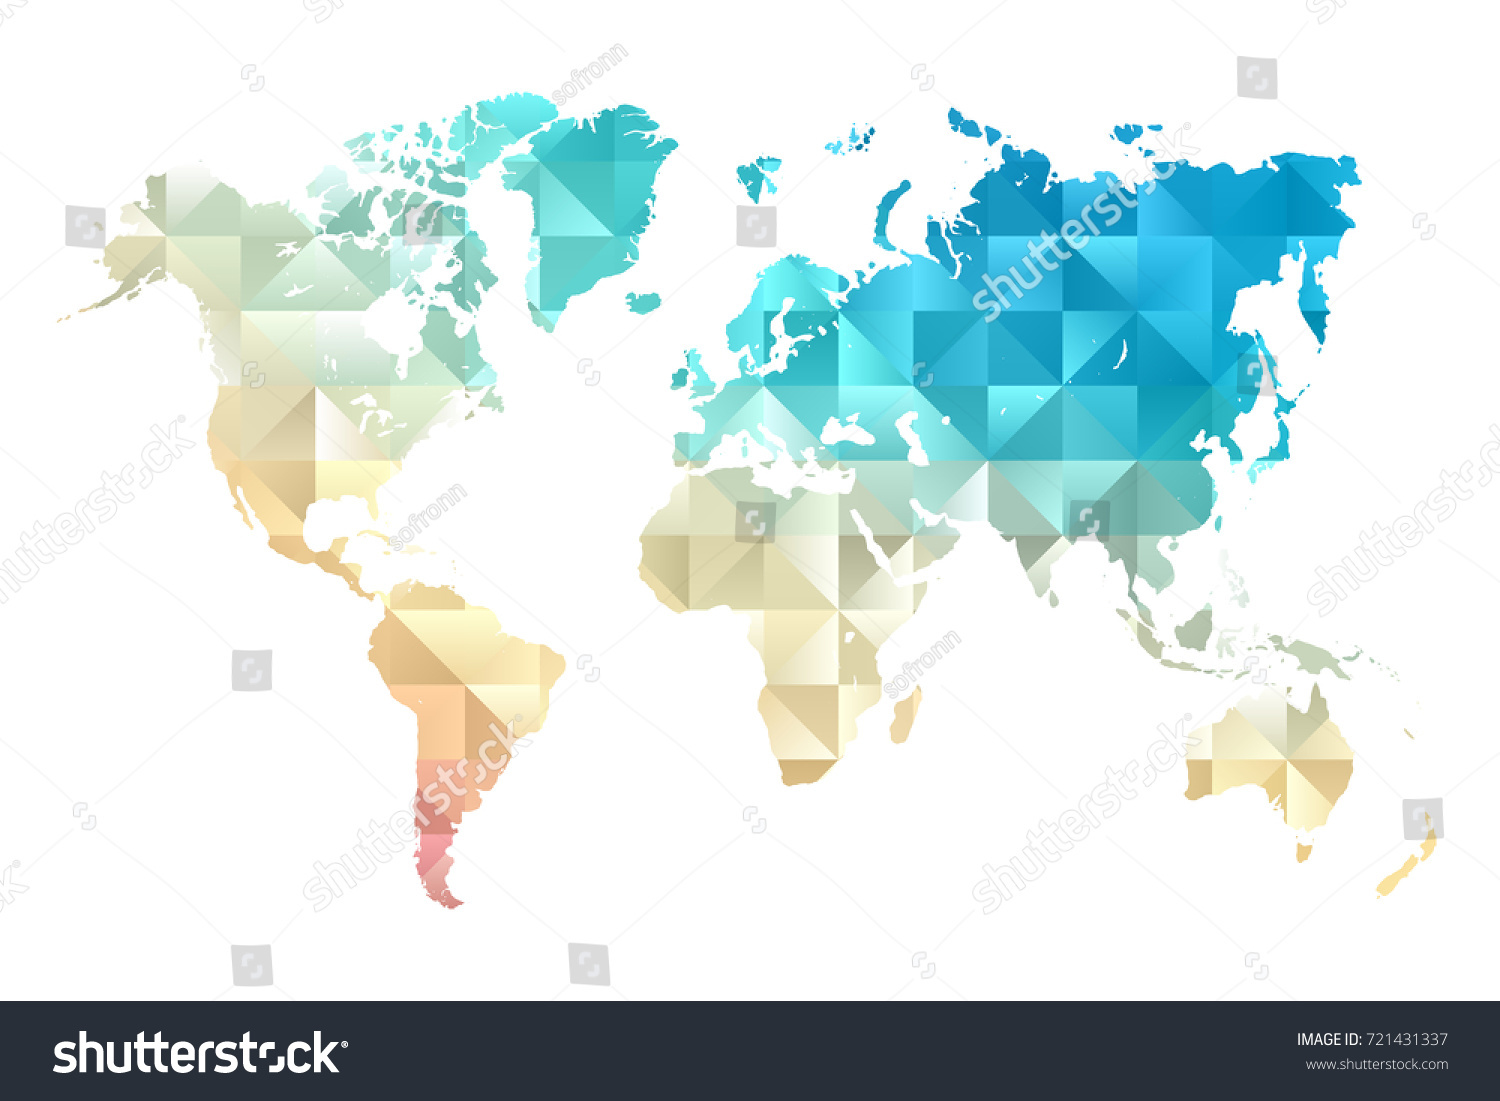 Low poly map of world. Made of triangles. Colorful polygonal shape vector illustration on white background. Vector illustration eps 10. #721431337